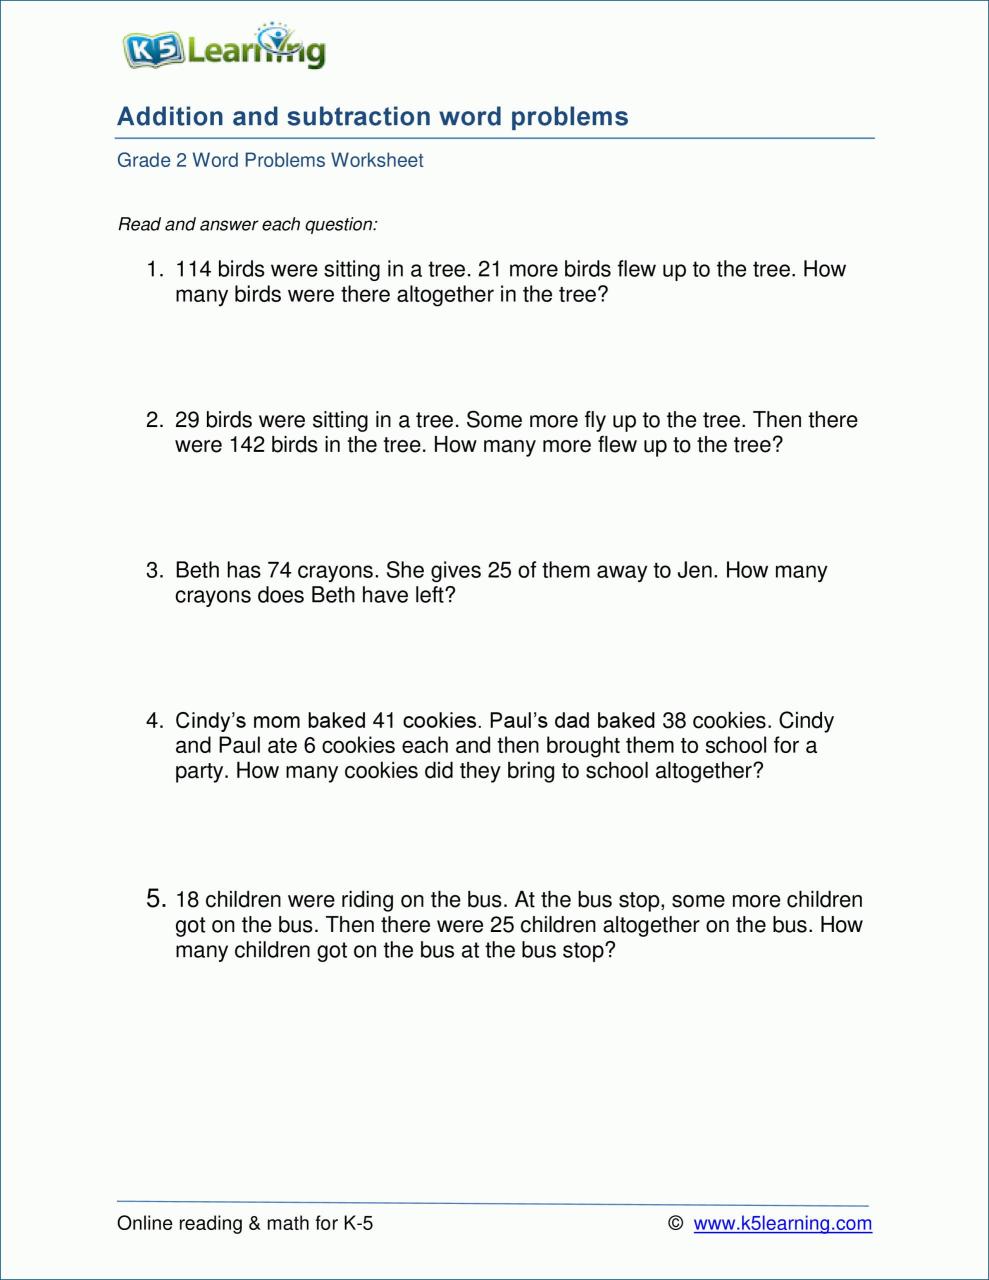 Grade 4 Addition And Subtraction Word Problems Worksheets